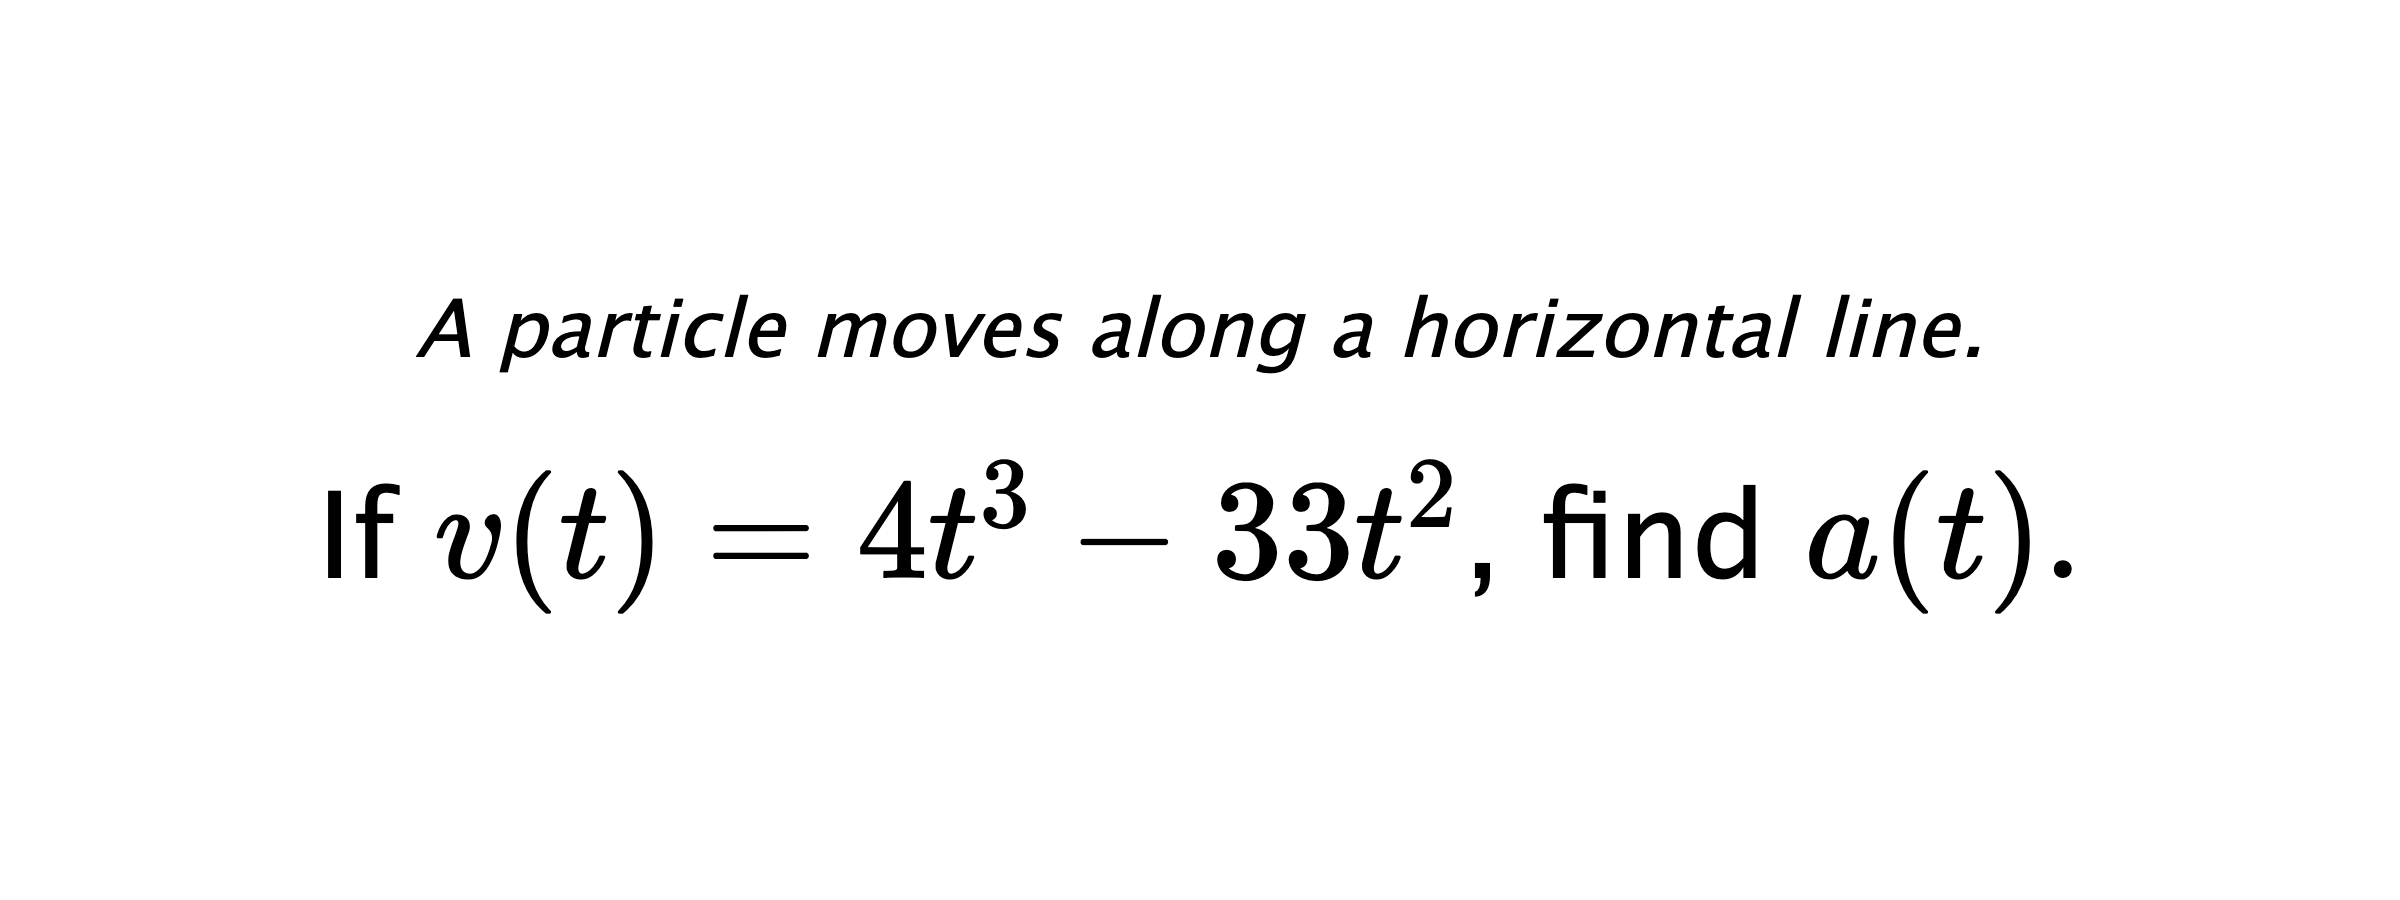 A particle moves along a horizontal line. If $ v(t)=4t^3-33t^2 $, find $ a(t). $